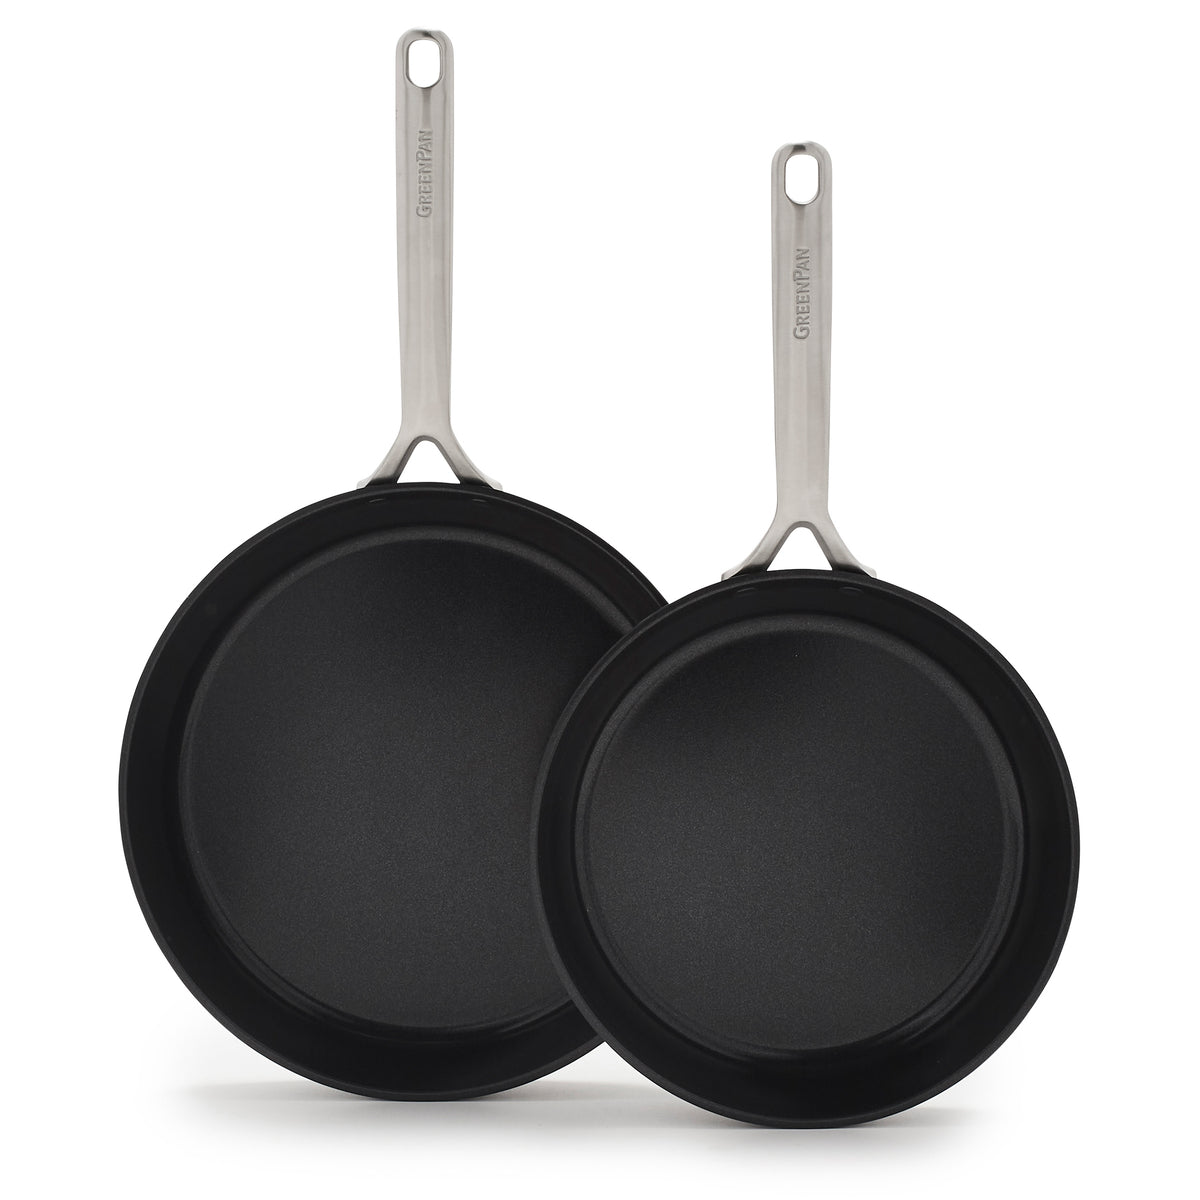 Nonstick vs. Ceramic Skillets: Which Should You Buy?